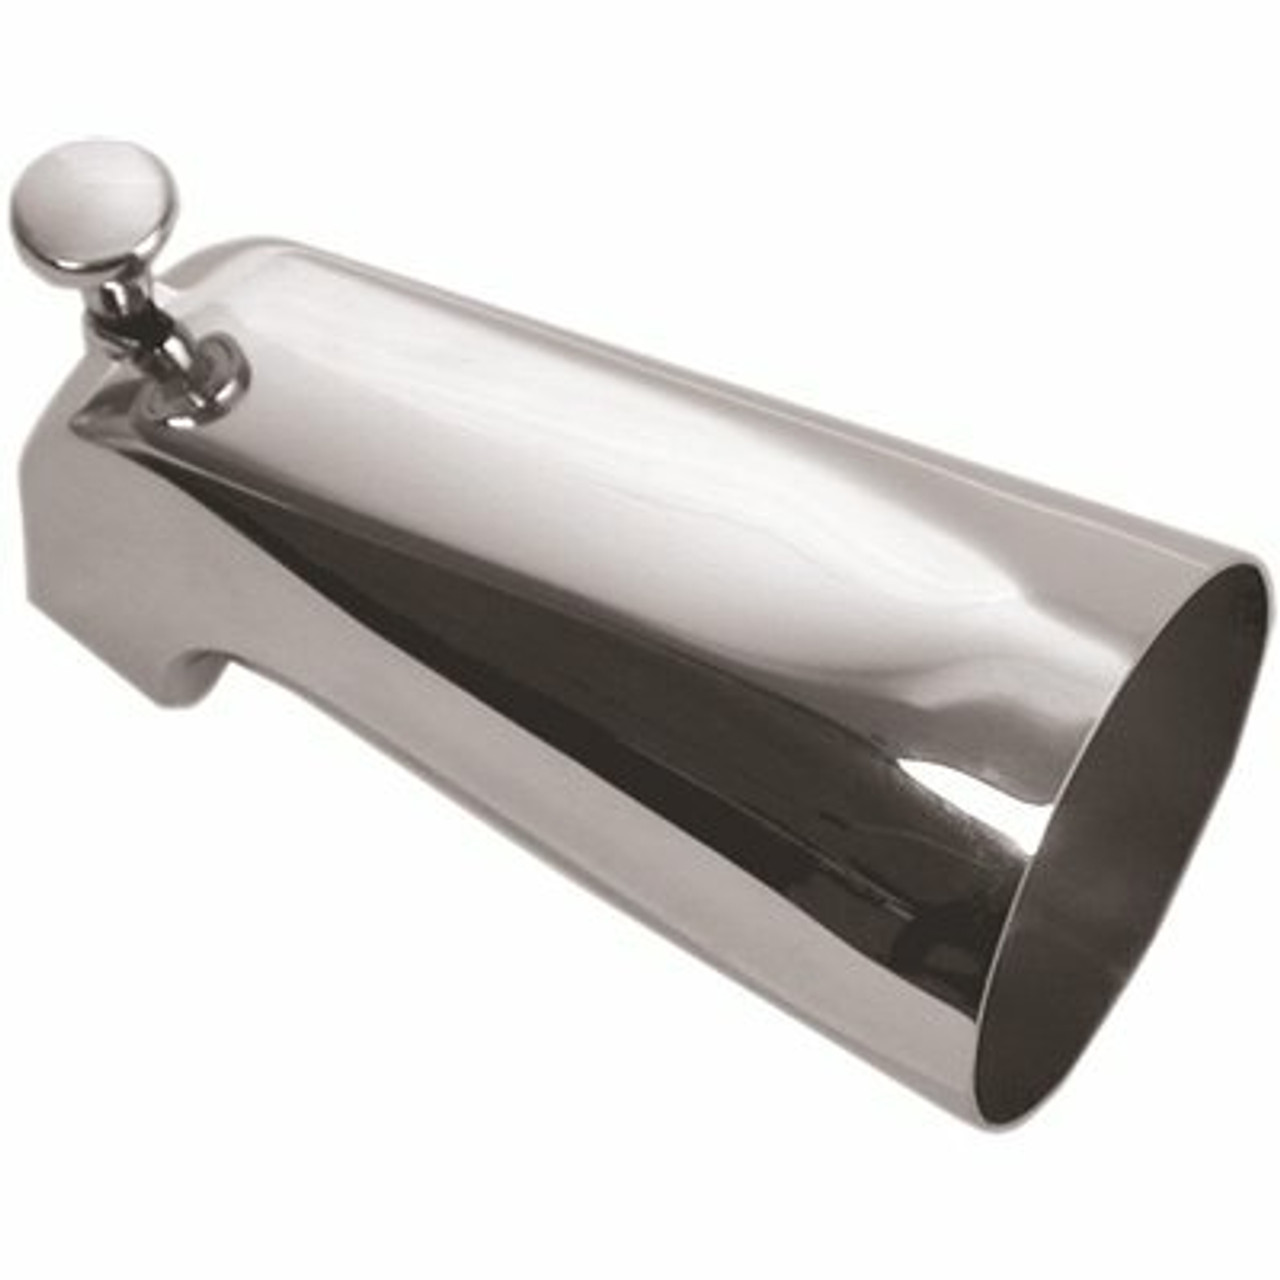 Danco 5 In. Bathroom Tub Spout With Front Diverter, Chrome